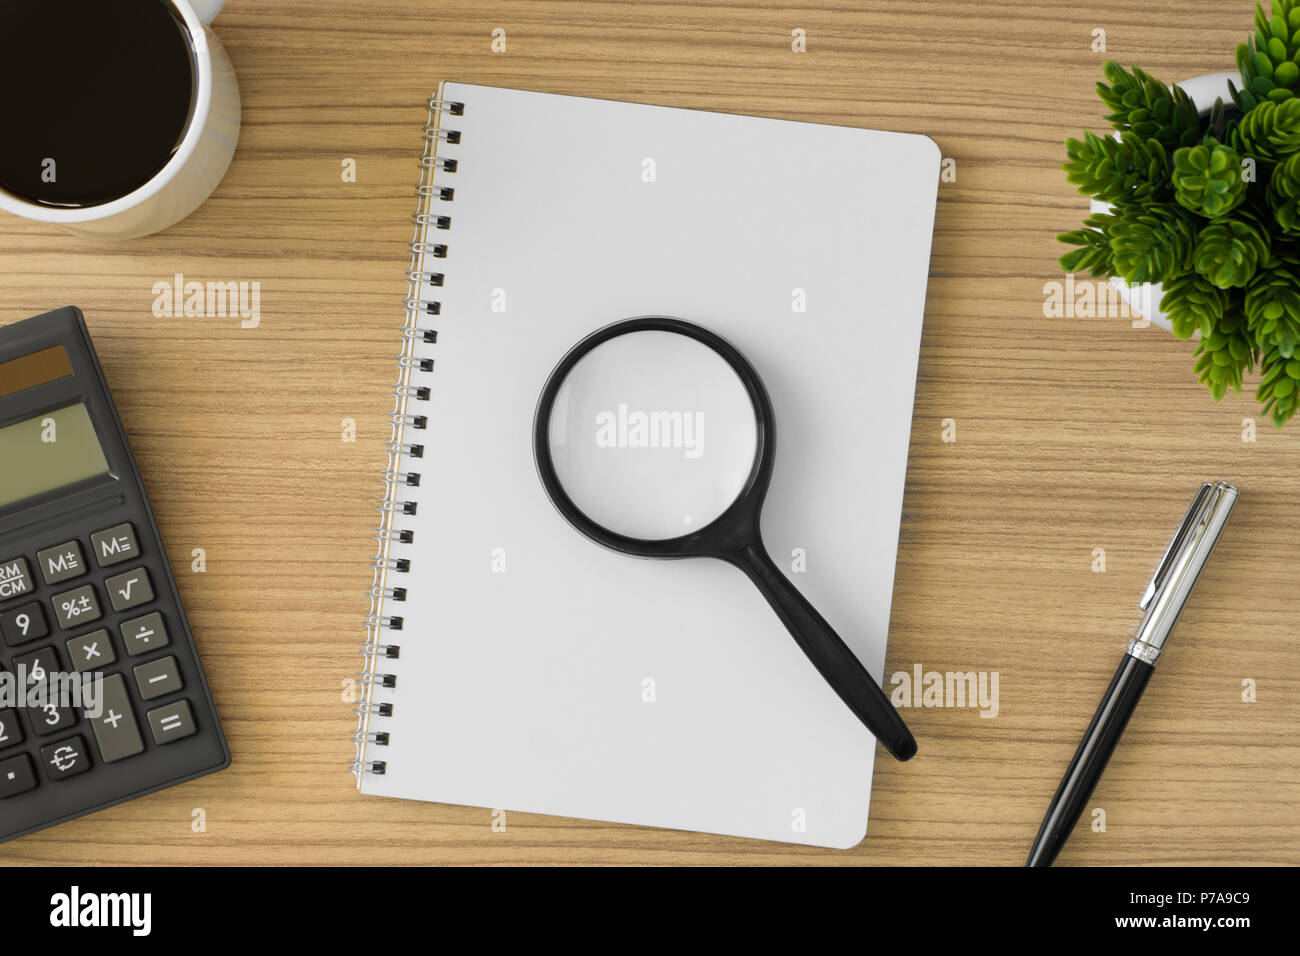 Magnifying glass on top of notebook with multiple office supply. Stock Photo